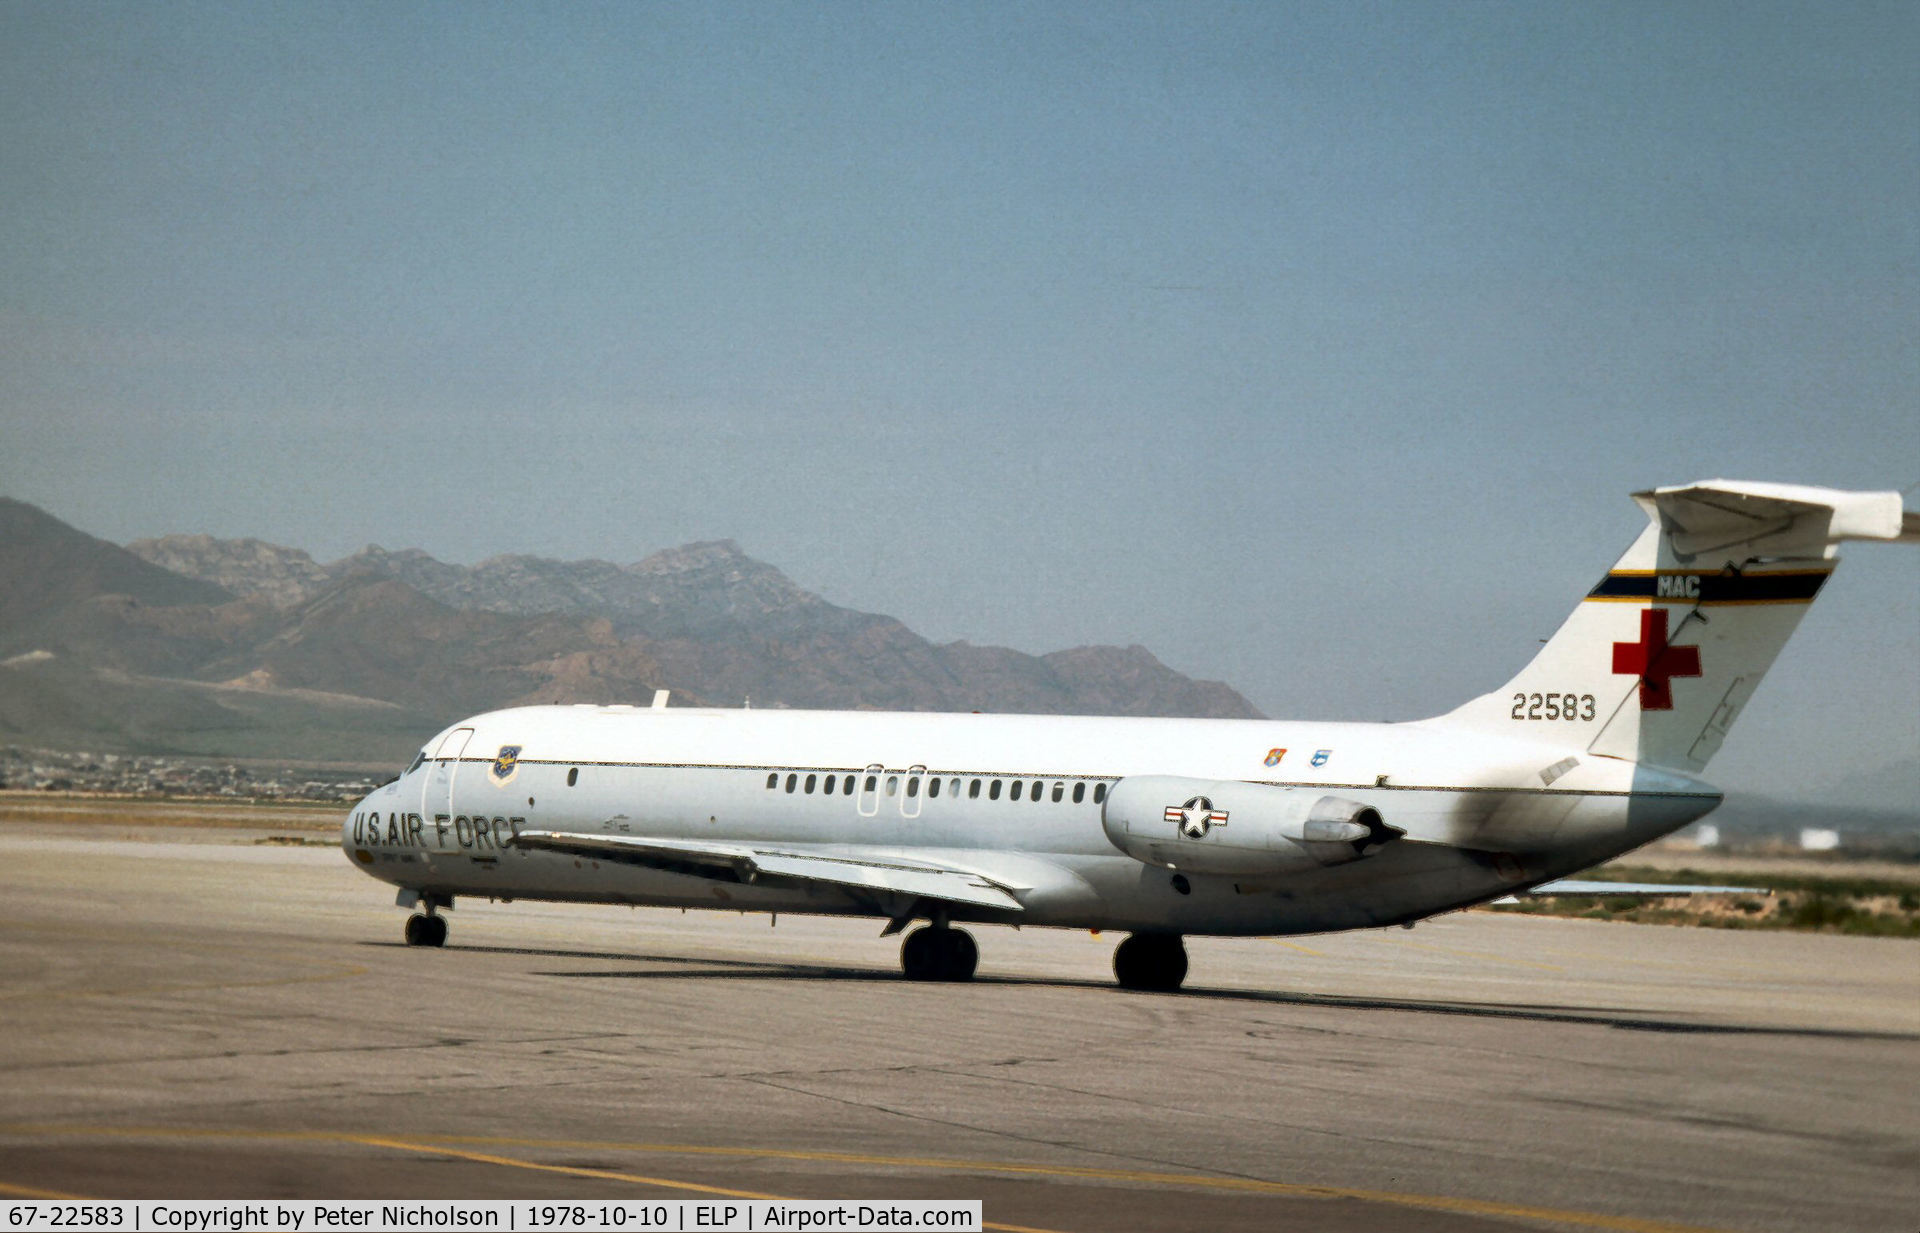 67-22583, 1968 McDonnell Douglas C-9A Nightingale C/N 47241, C-9A Nightingale of 375th Aeromedical Airlift Wing at Scott AFB passing through El Paso in October 1978.